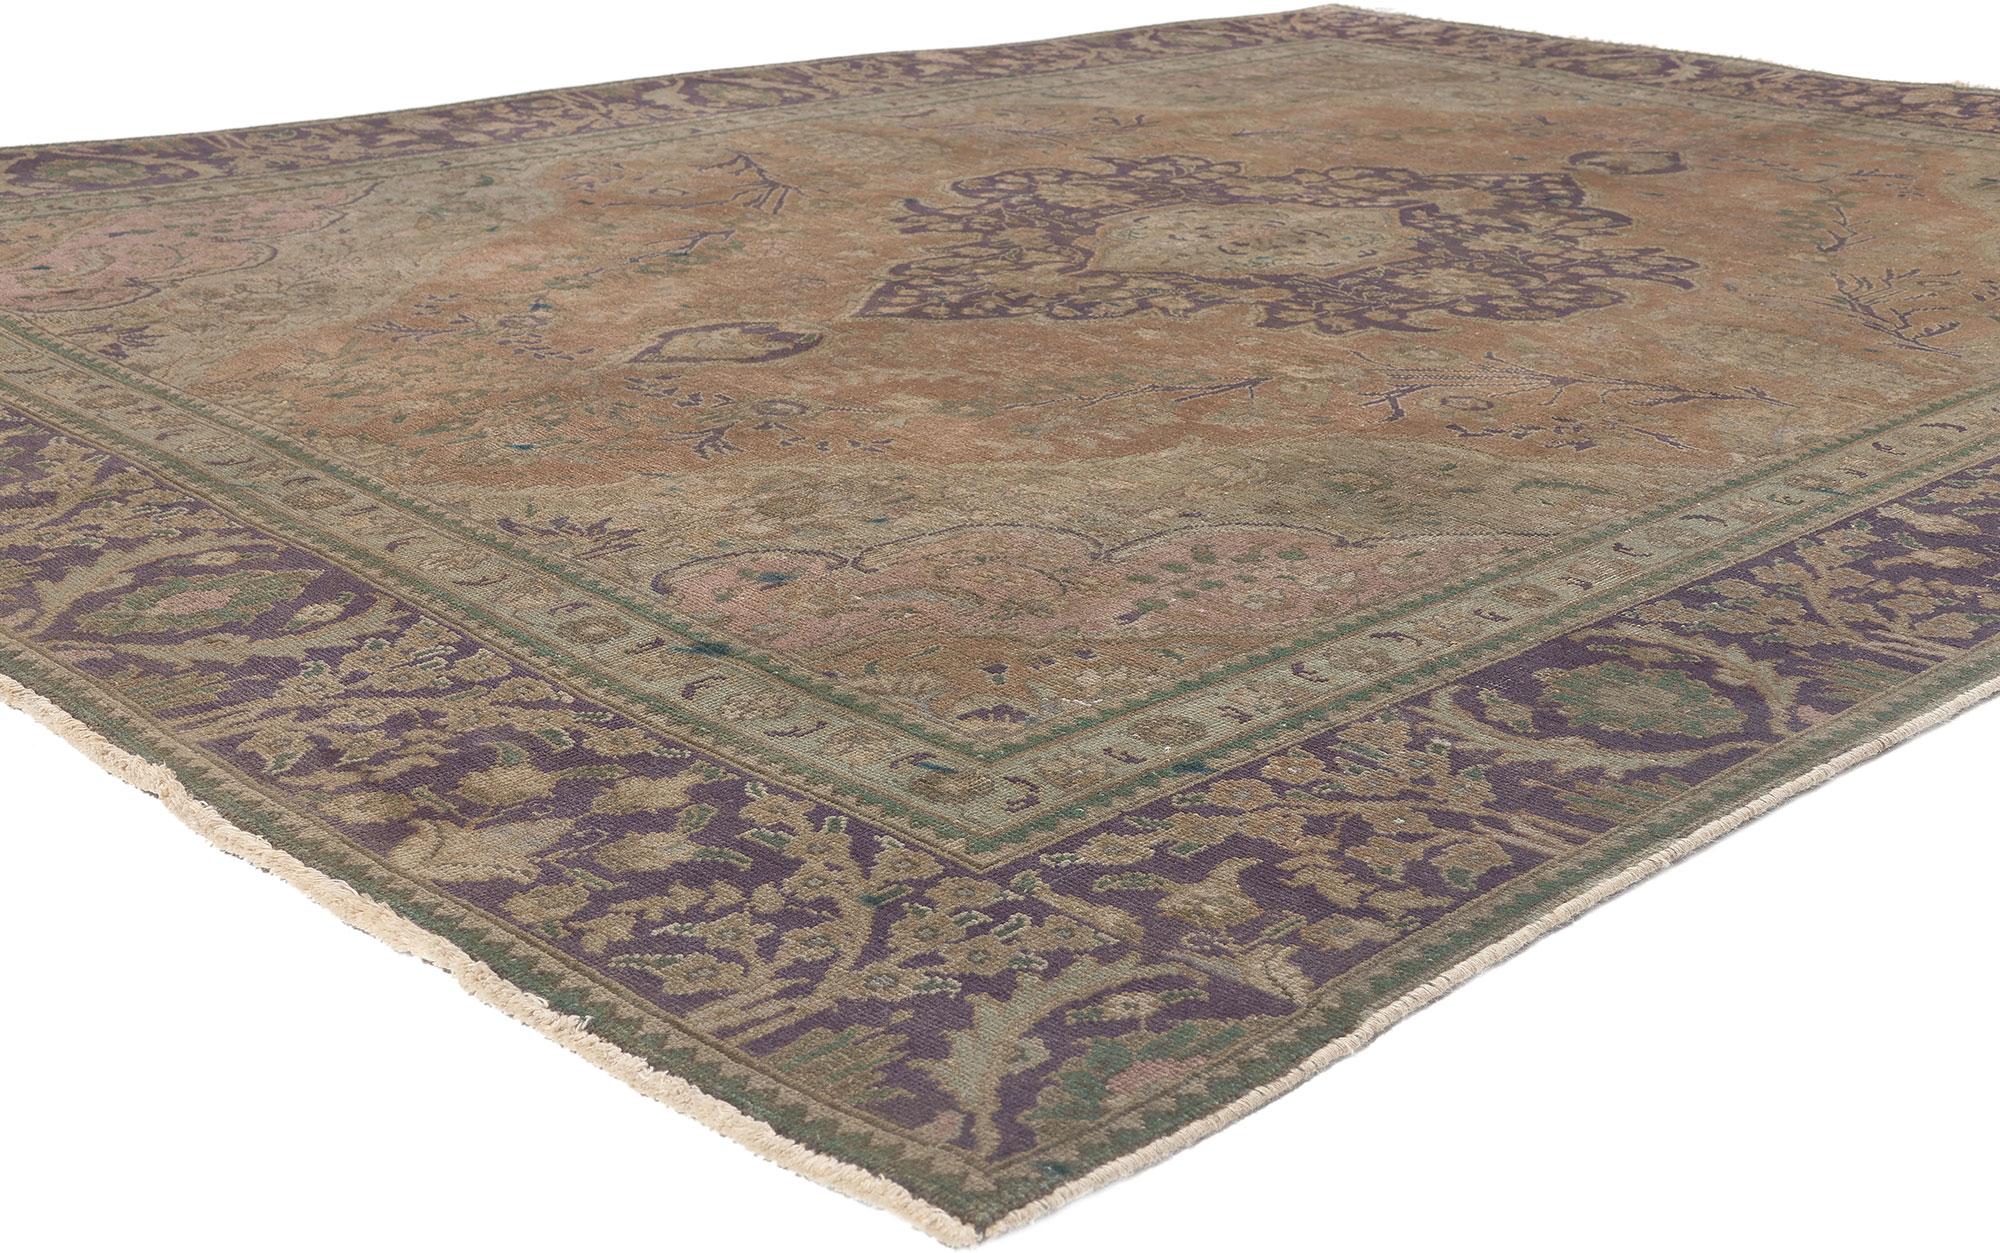 74850 Antique Persian Tabriz Rug , 07'02 x 09'11. 
Bridgerton style meets the softer side of Maximalism in this antique Persian Tabriz rug. The highly decorative floral design and soft pastel colors woven into this piece work together creating a